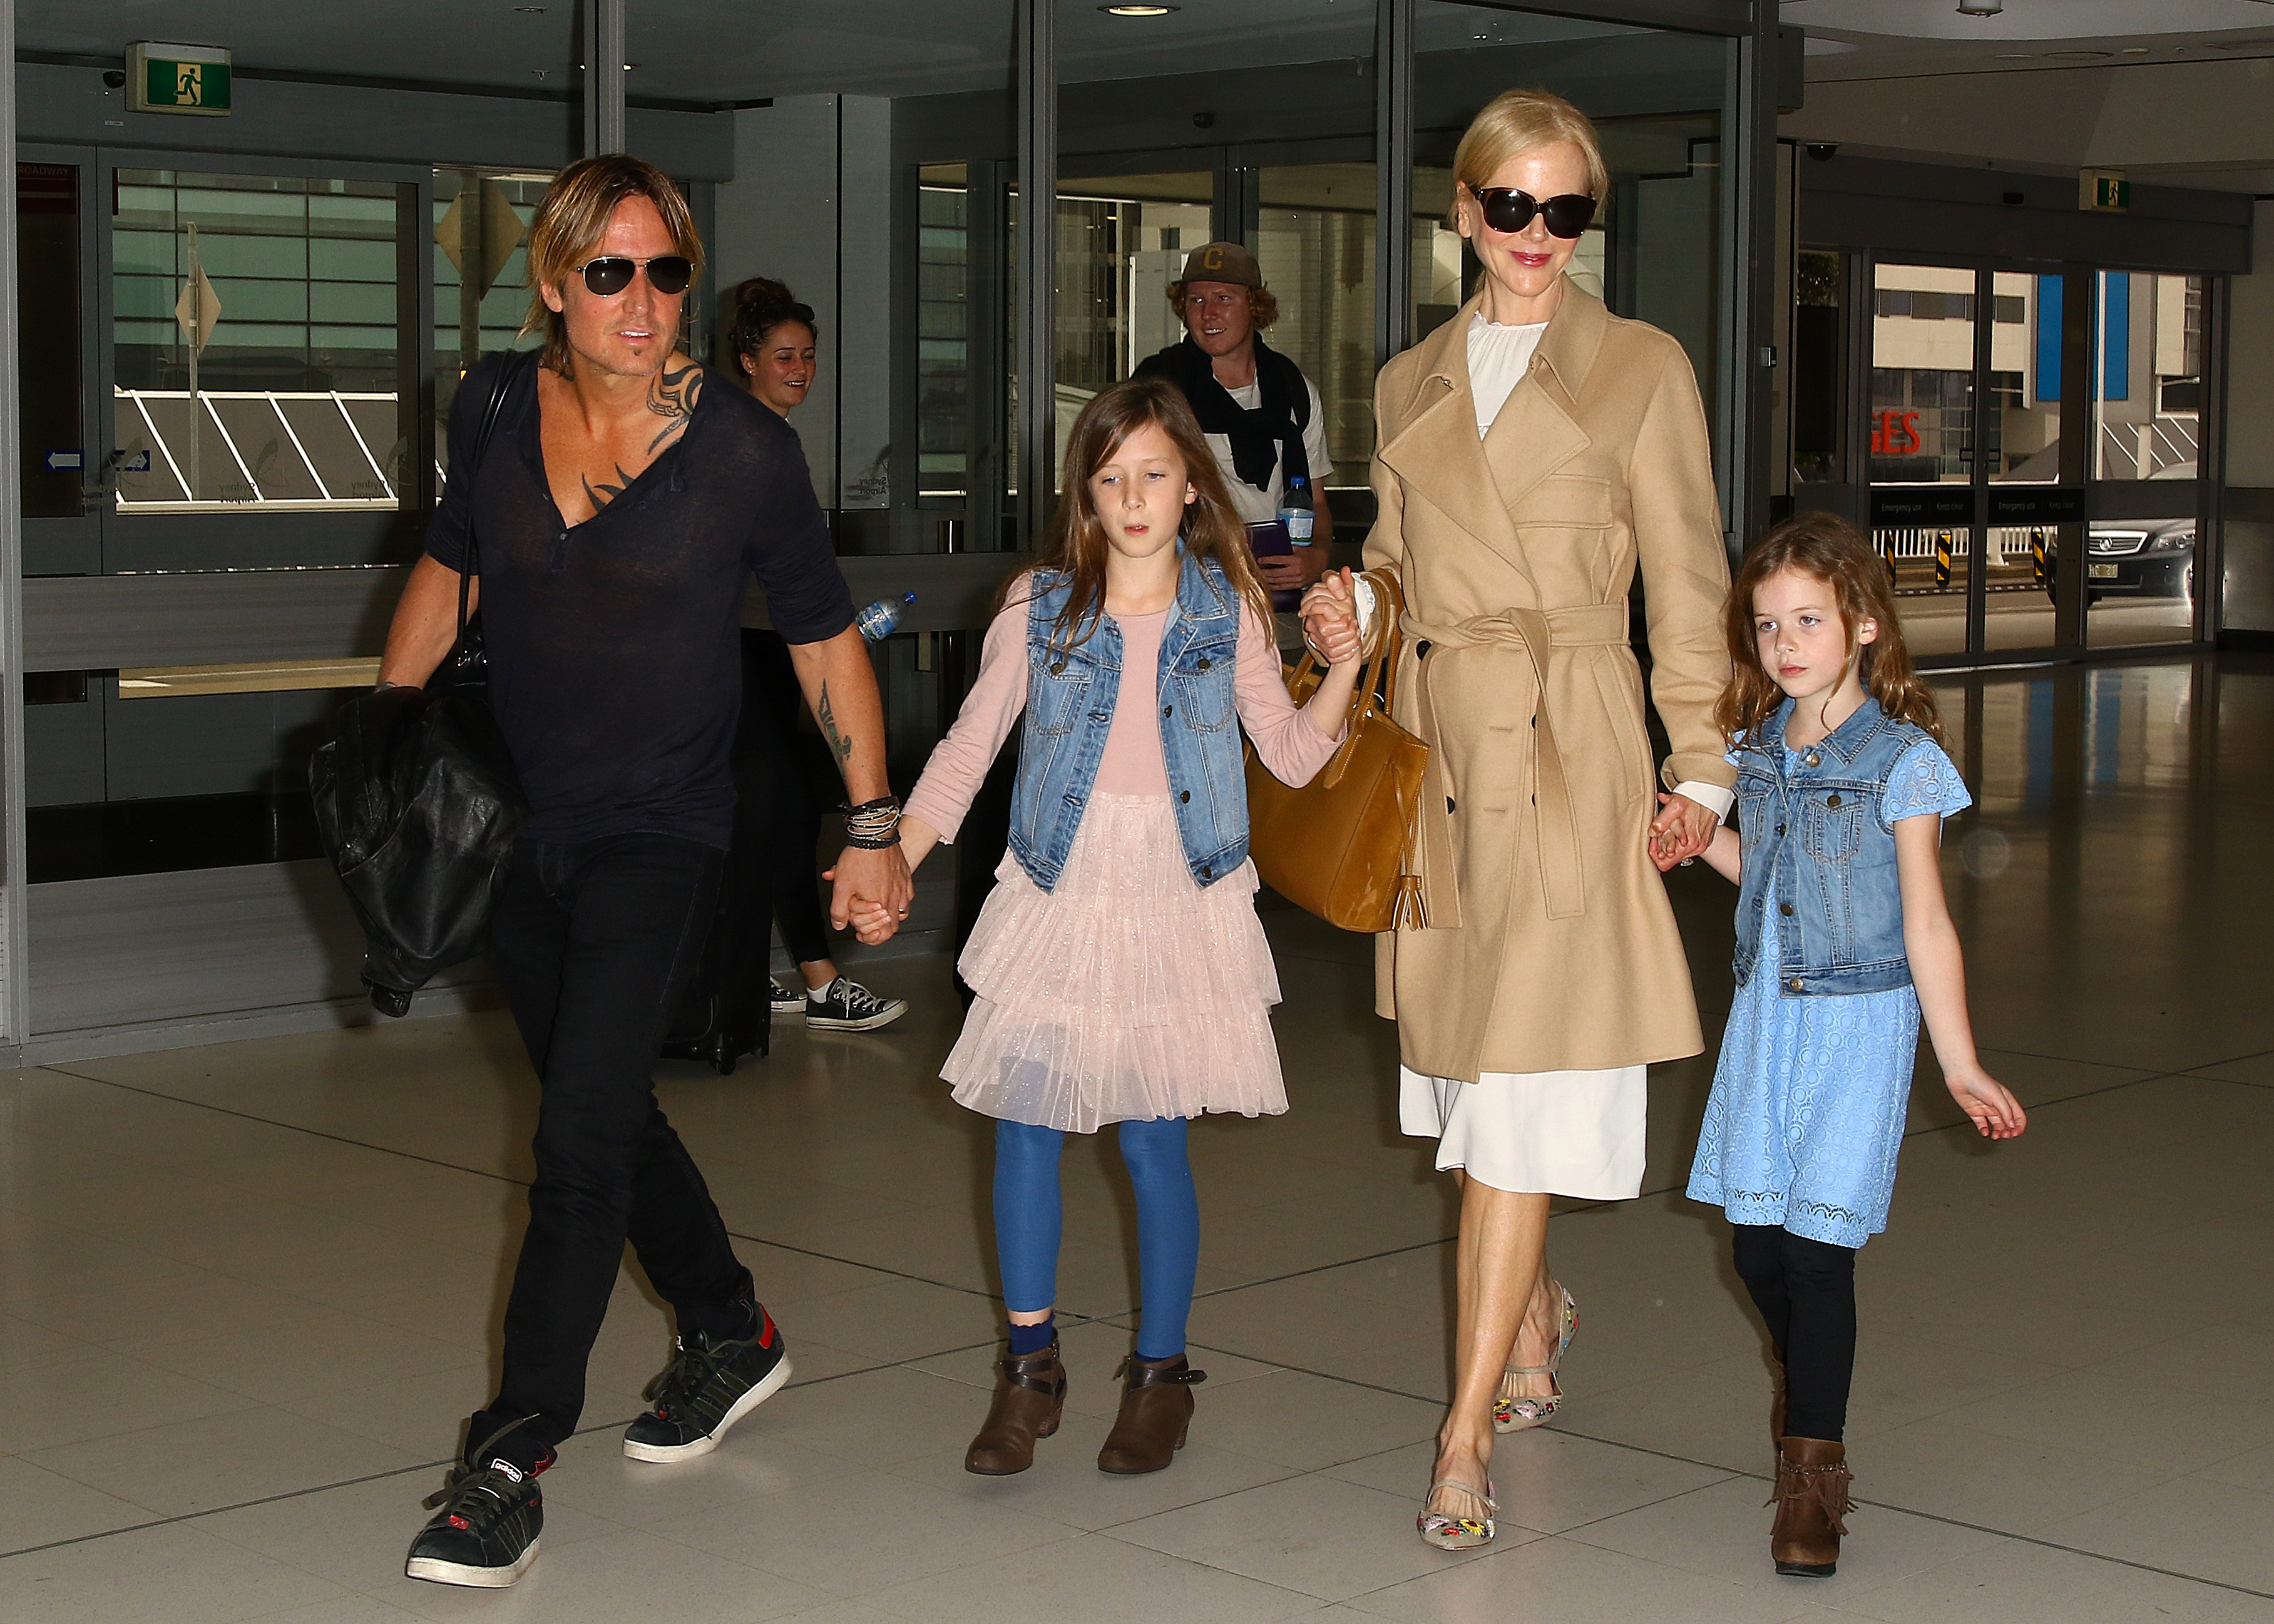 Nicole Kidman and Keith Urban with their daughters Faith Margaret and Sunday Rose in Sydney, Australia, on March 28, 2017. | Source: Getty Images